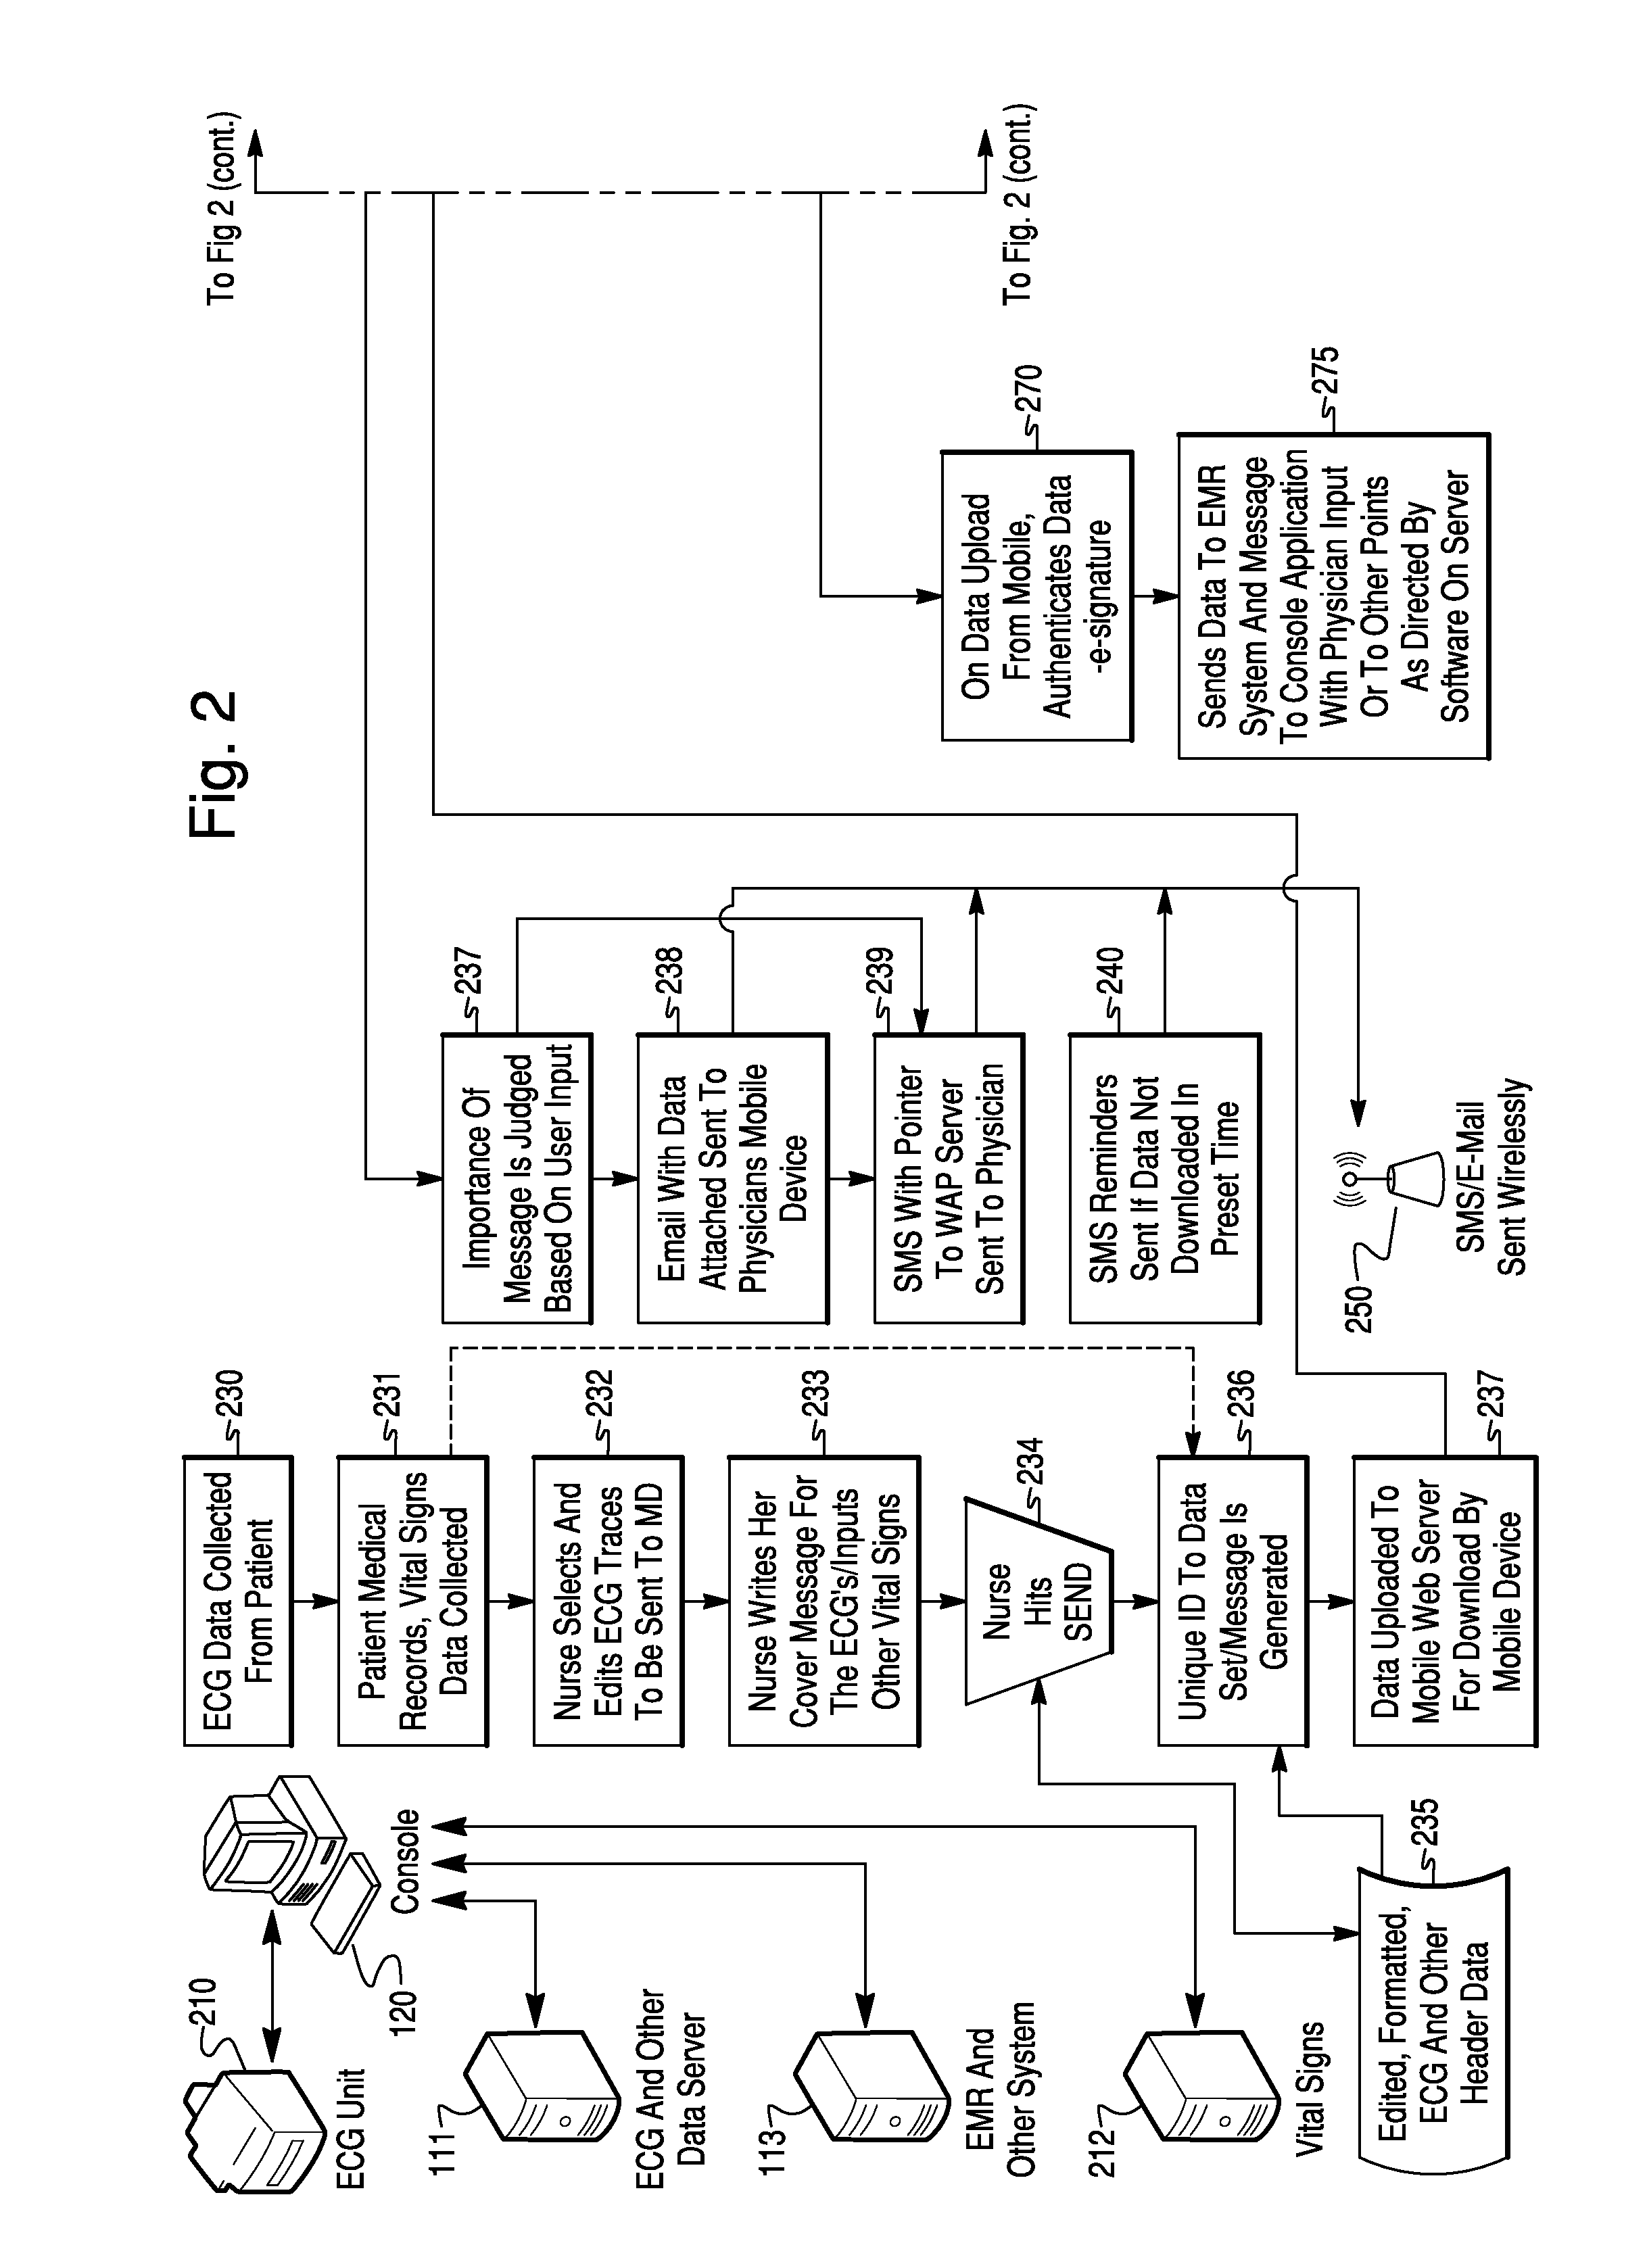 Method for Remote Review of Clinical Data